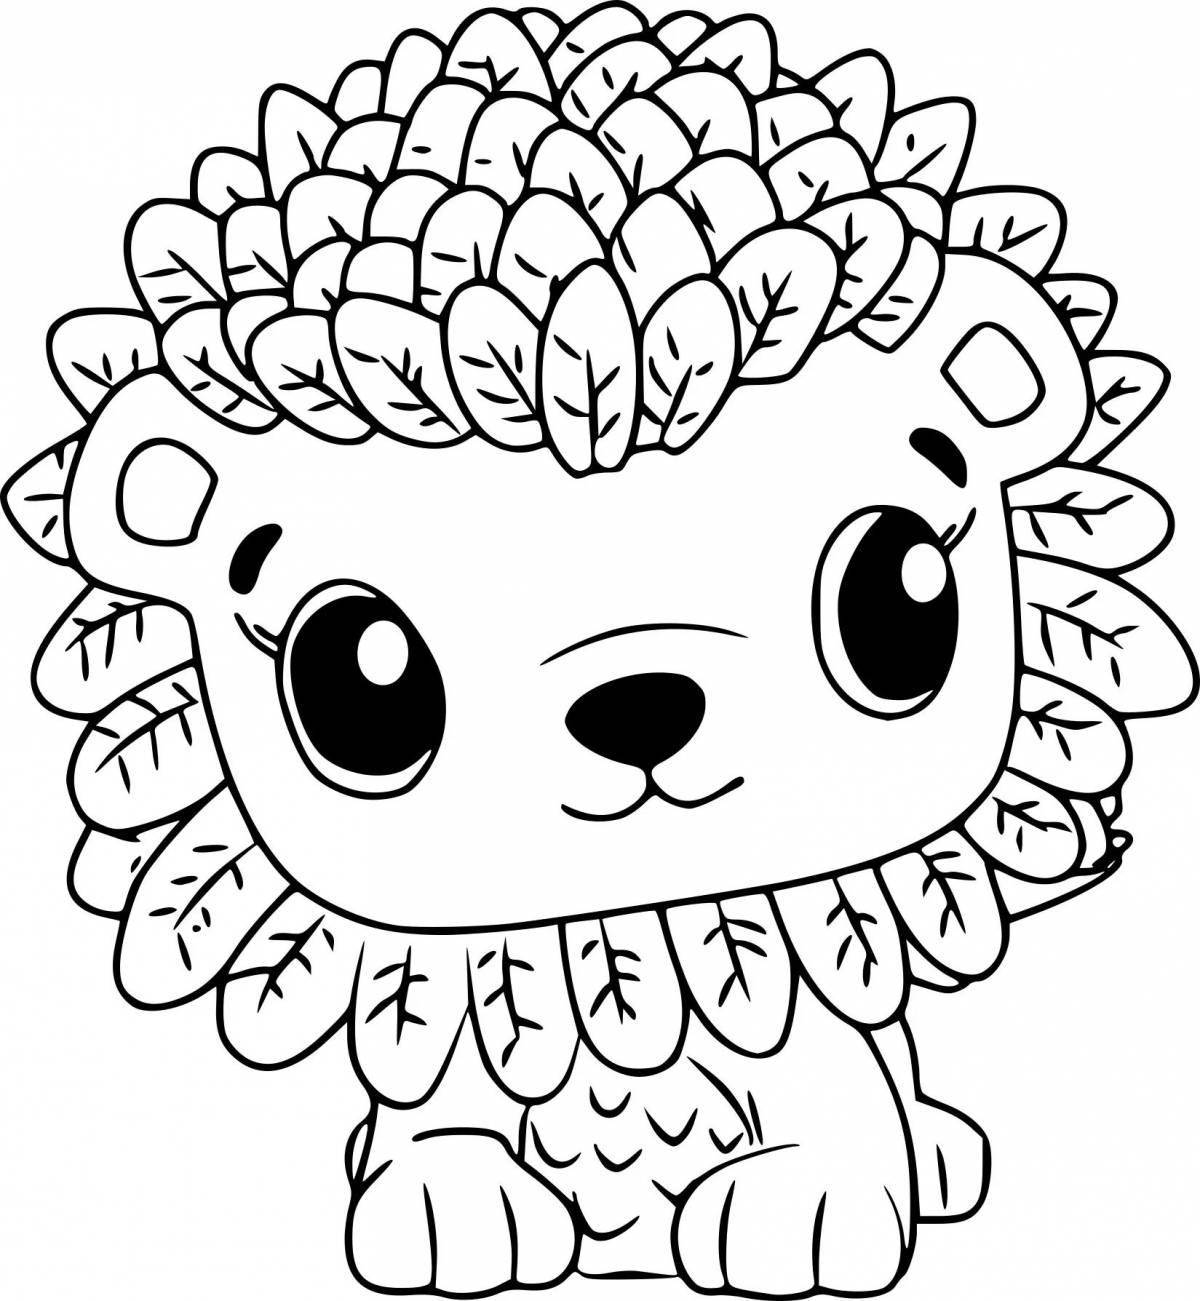 Colorful hechimols coloring pages